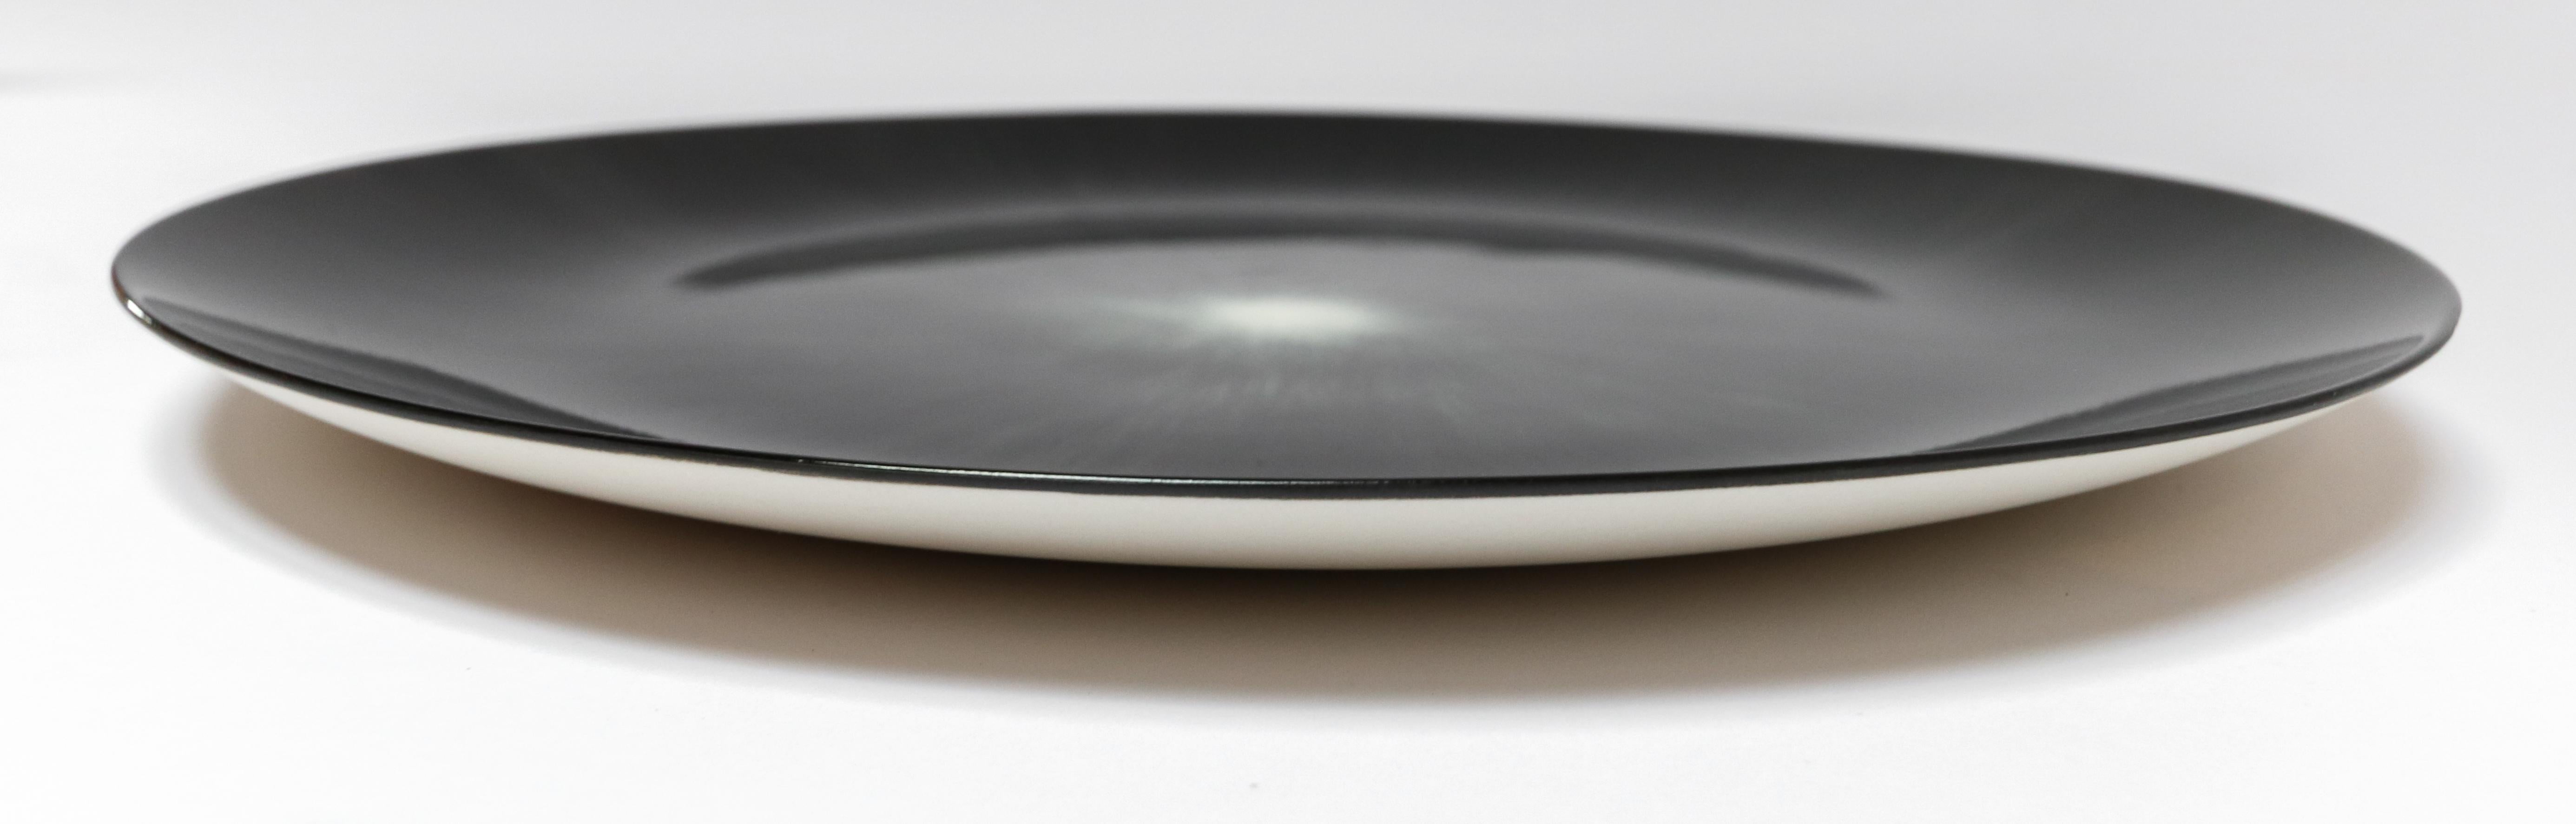 Contemporary Ann Demeulemeester for Serax Dé Dinner Plate / Charger in Black / Off White